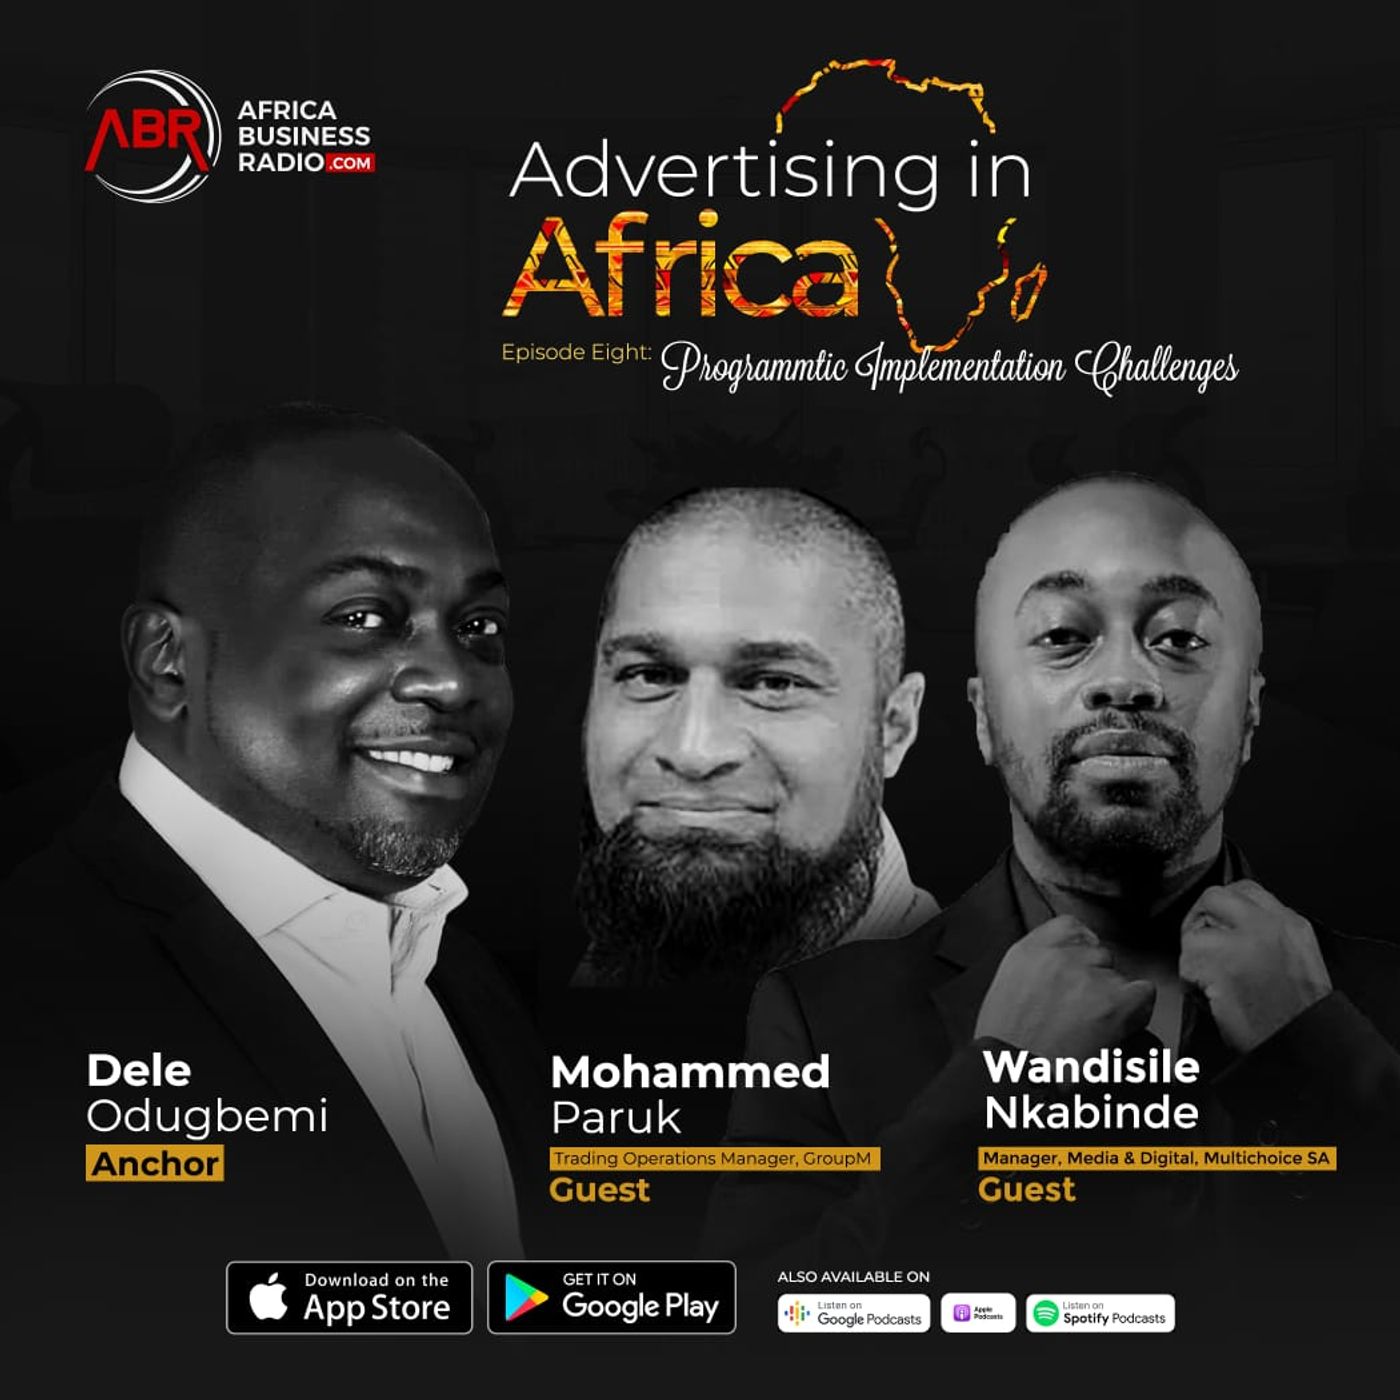 The Transition To Programmatic Buying - Mohammed Paruk & Wandisile Nkabinde